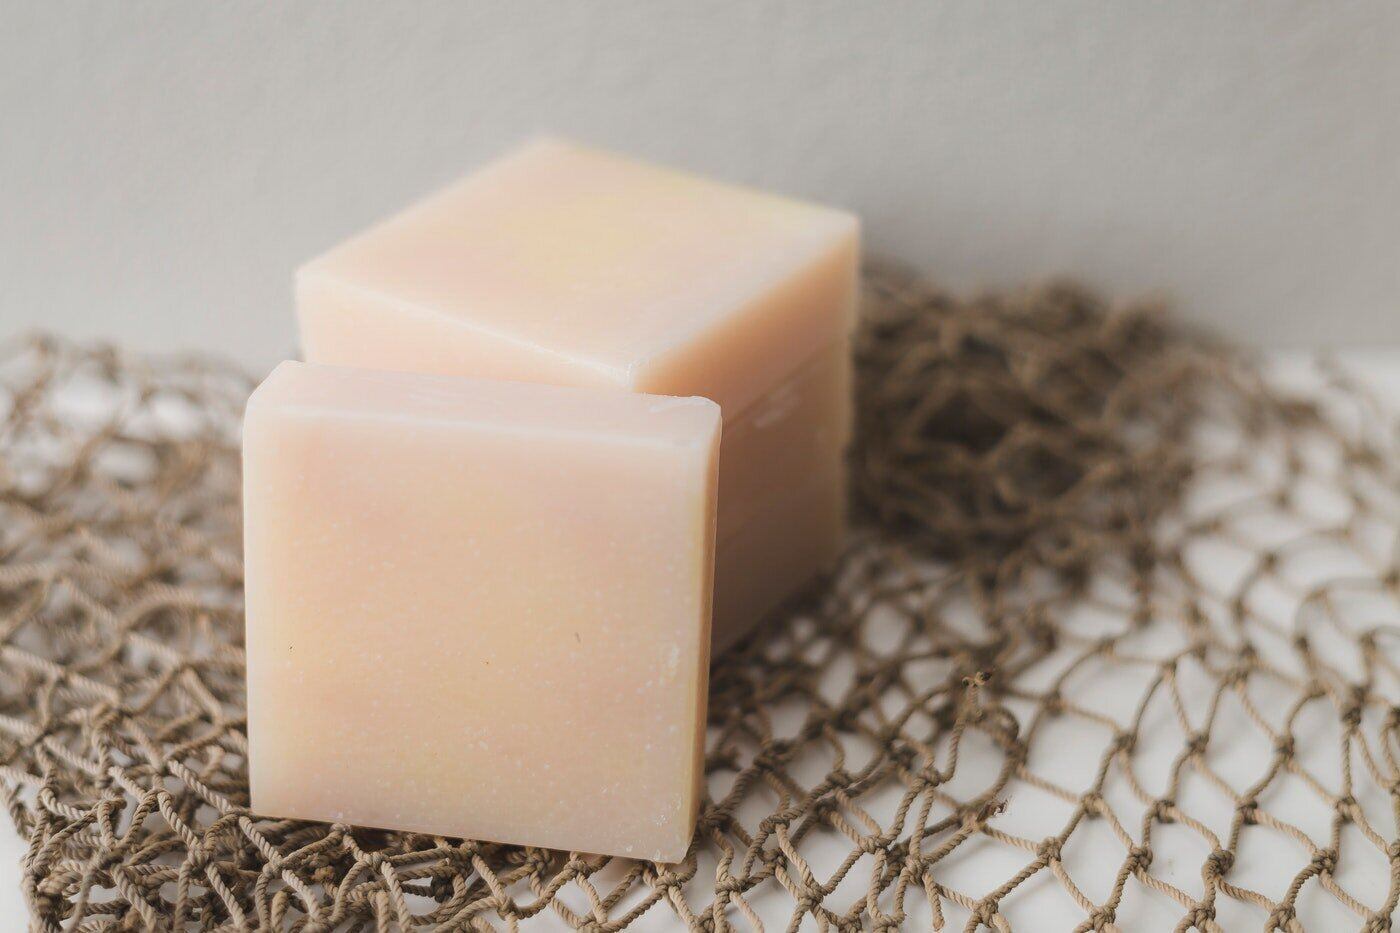 slices of soap - 7 reasons to consider all-natural products